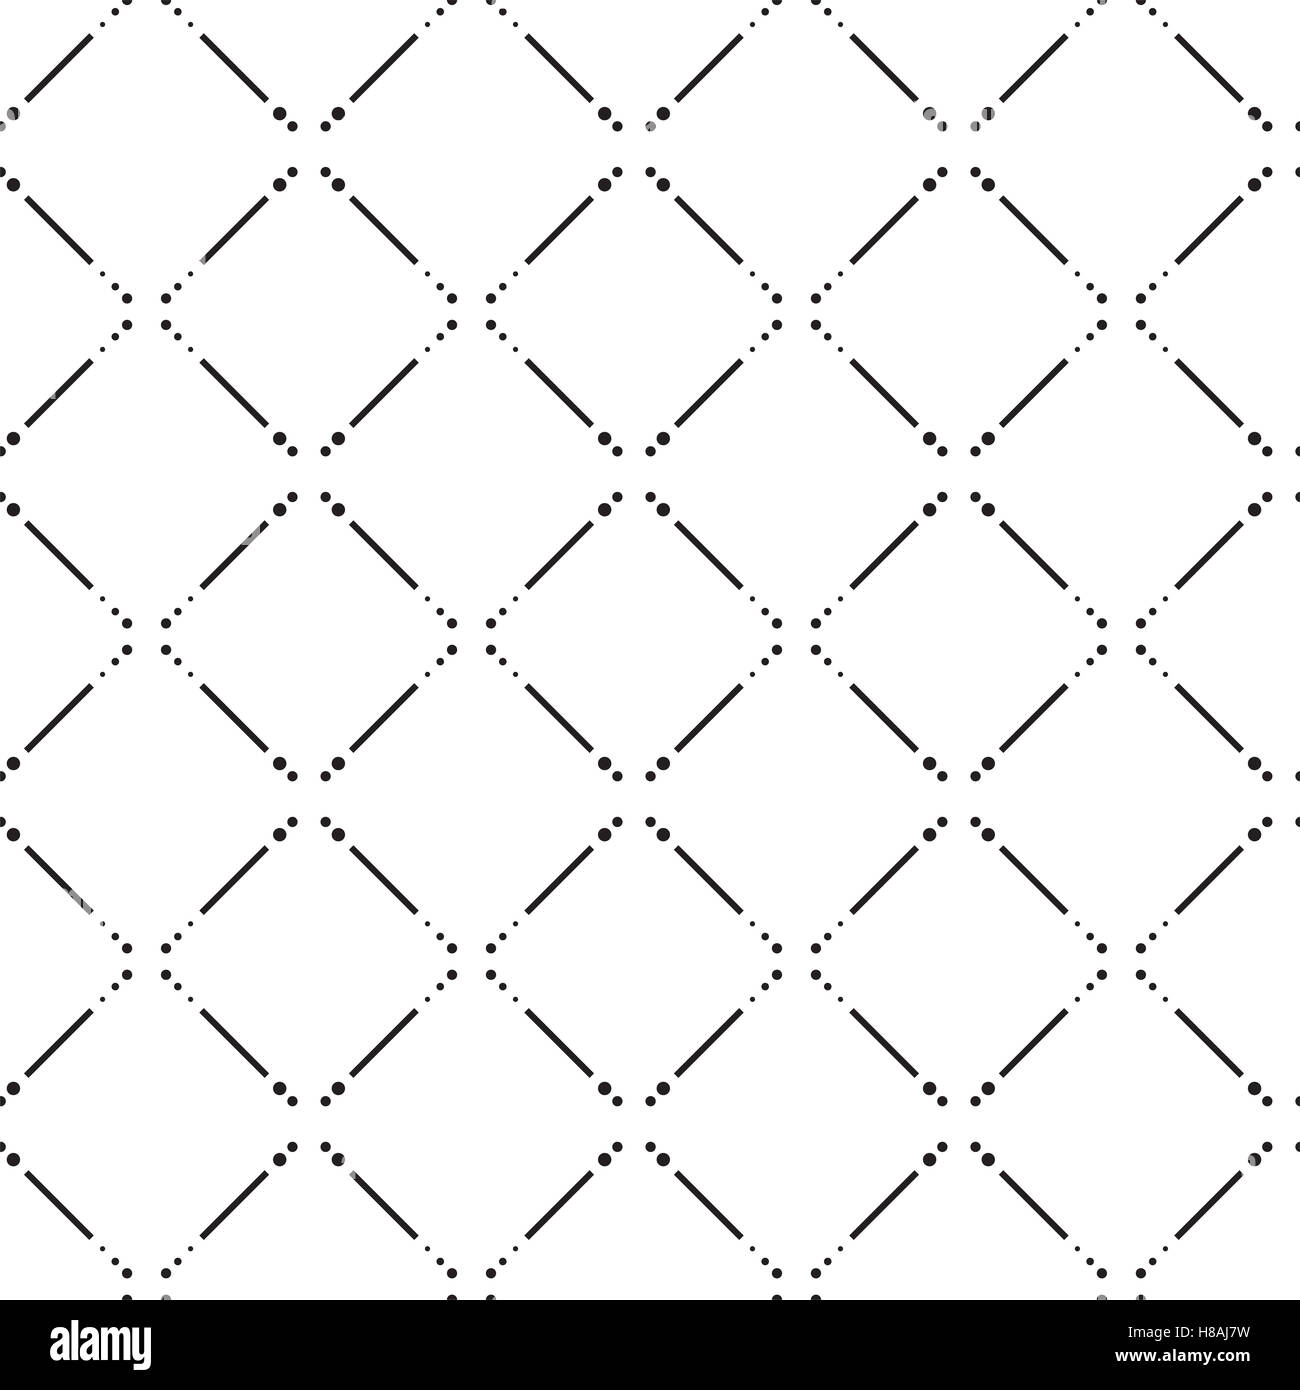 Design tiles Cut Out Stock Images & Pictures - Page 3 - Alamy